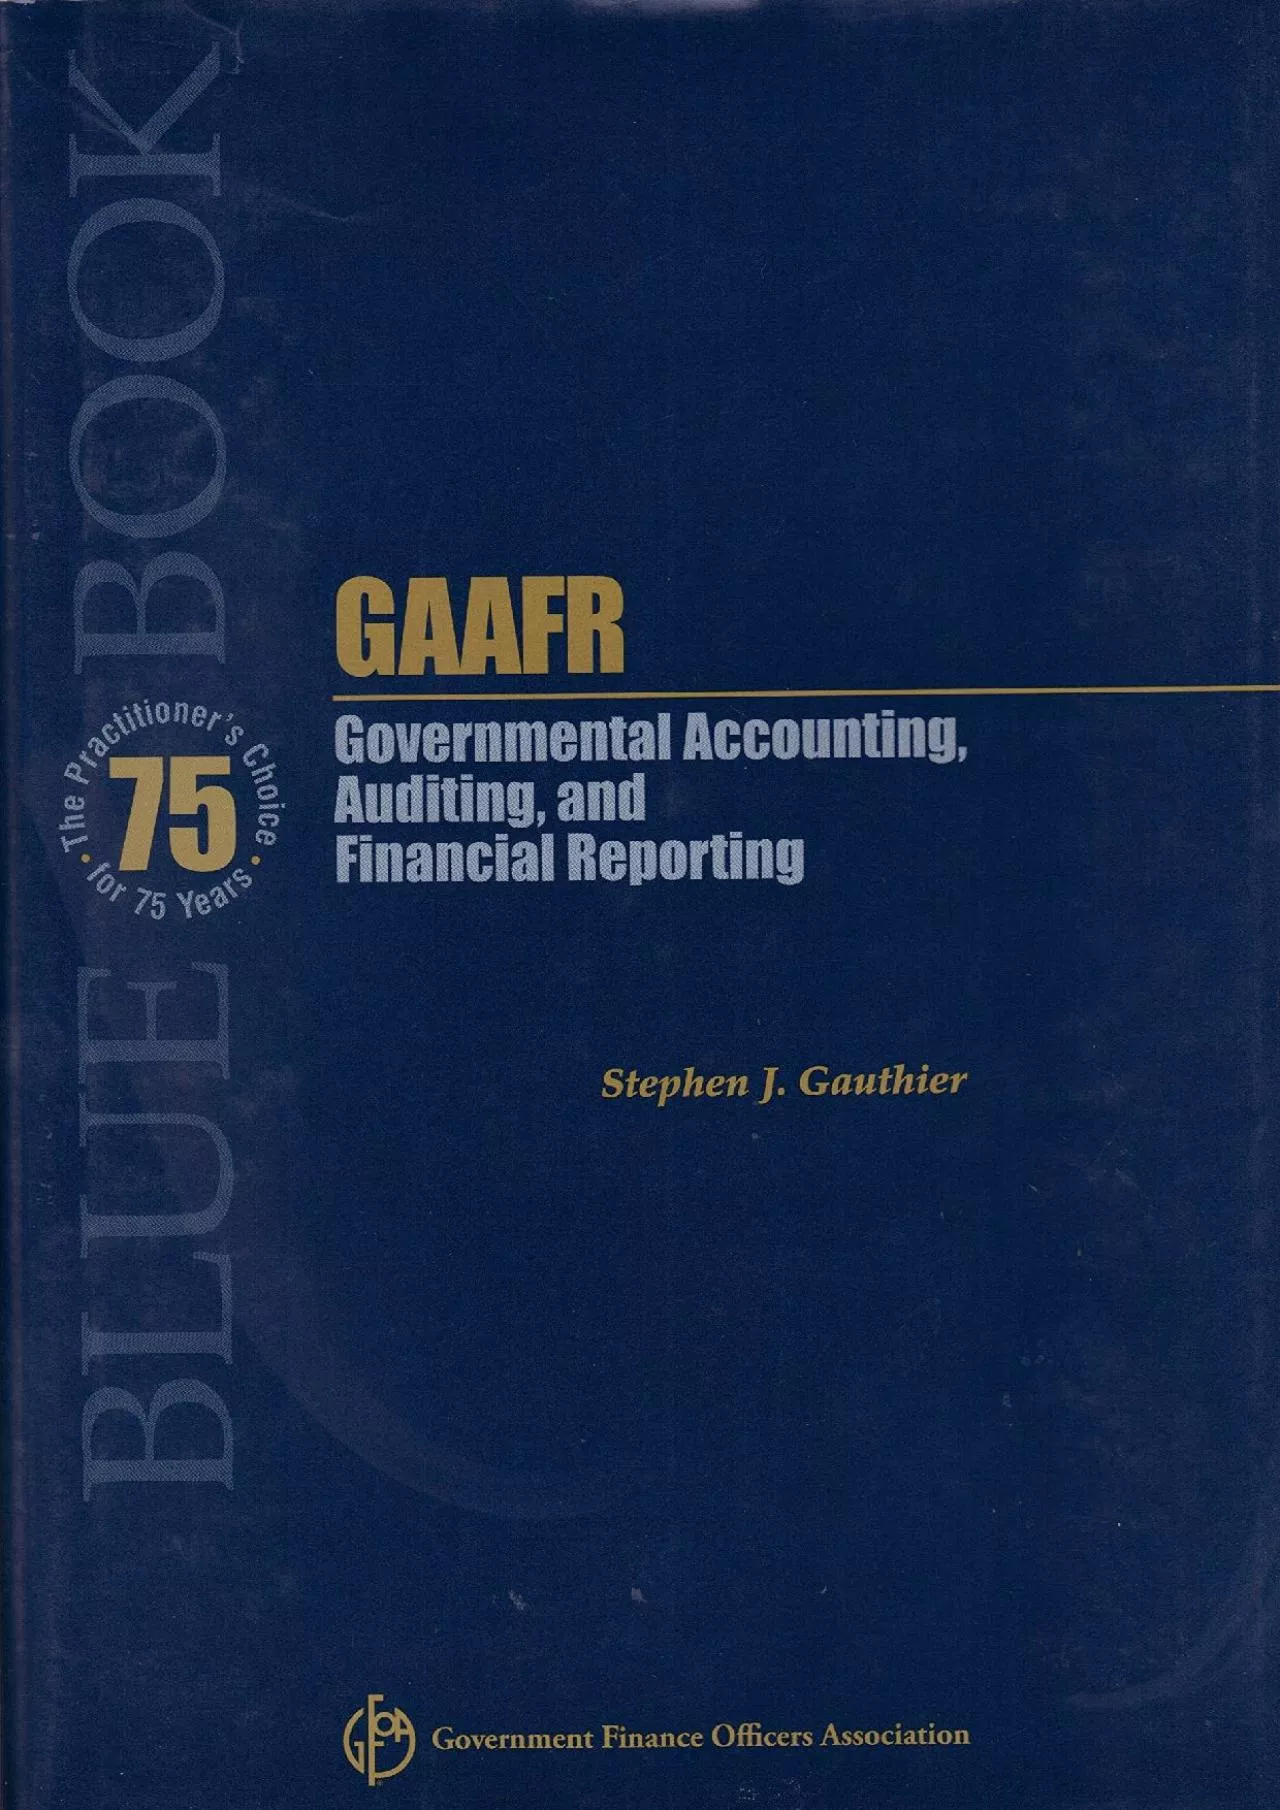 GAAFR Governmental Accounting Auditing and Financial Reporting